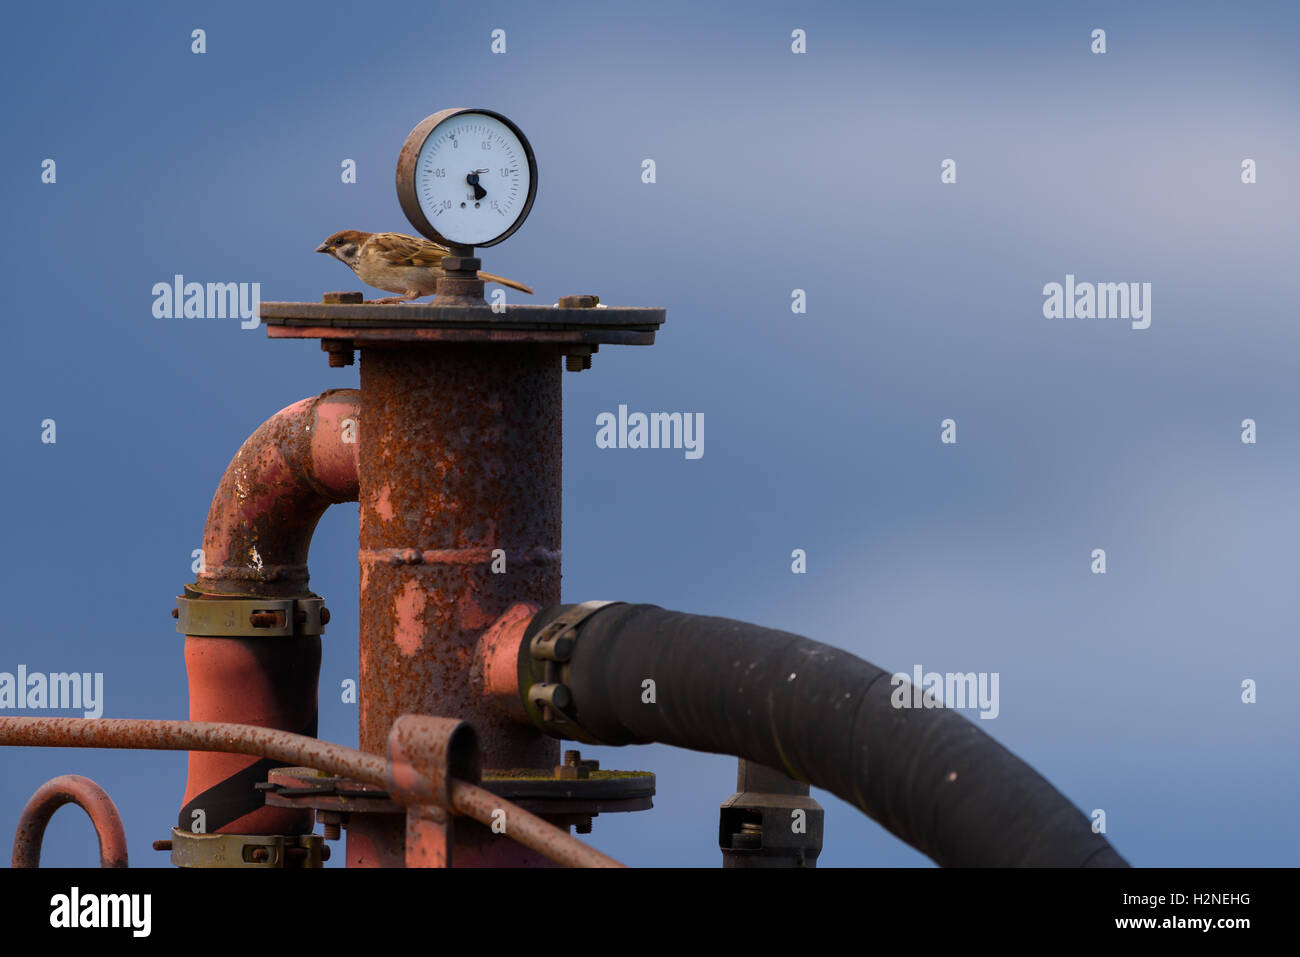 Sparrow sitting behind meter and on top of a red and rusty old machine Stock Photo